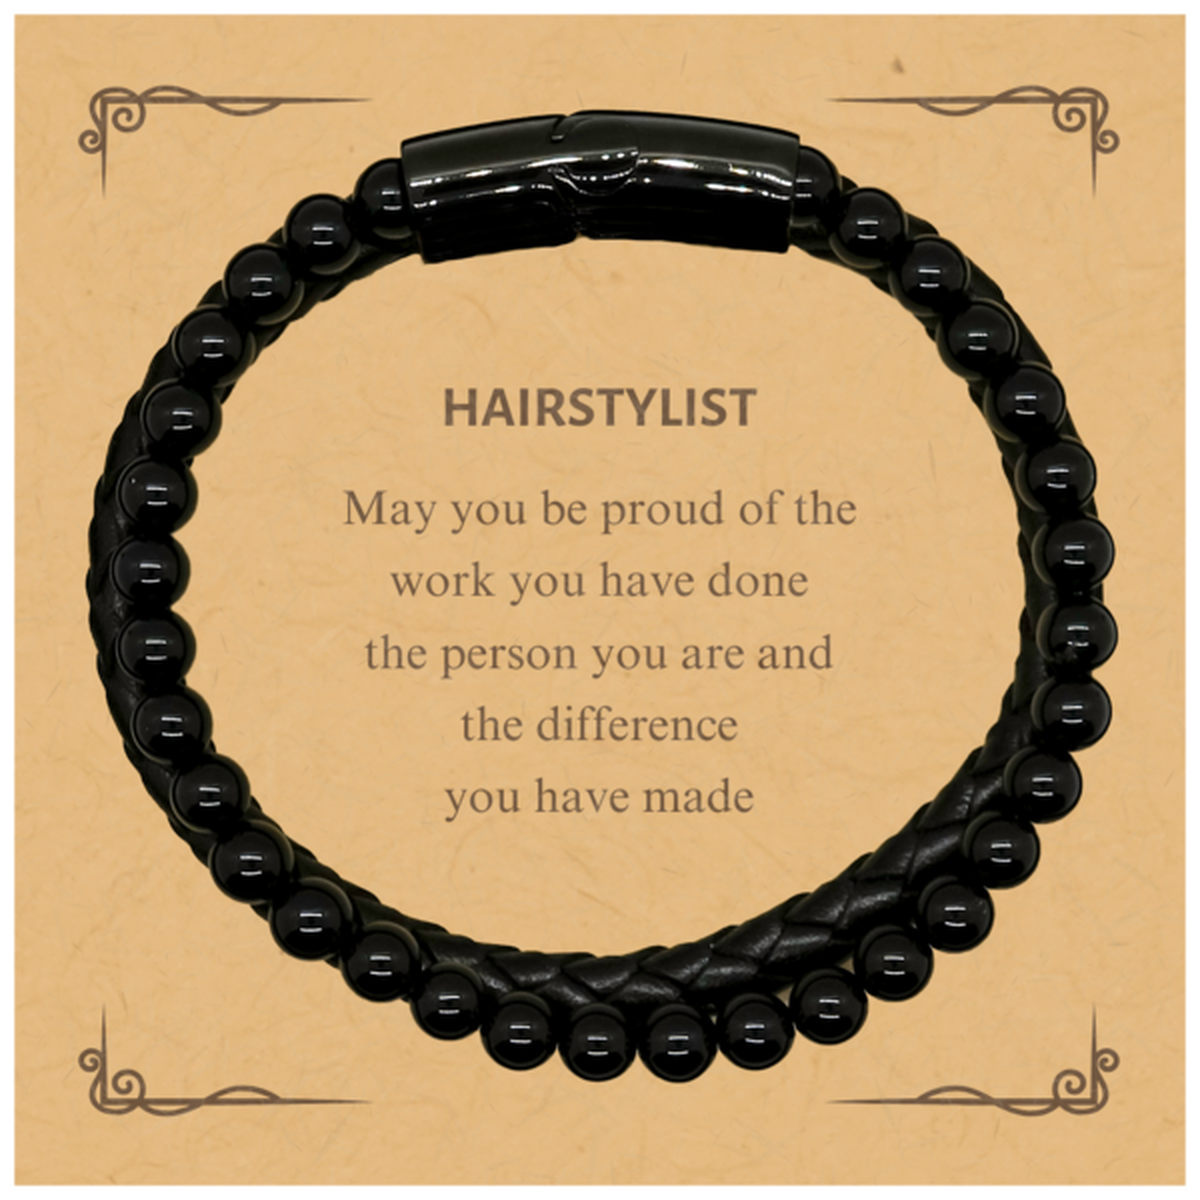 Hairstylist May you be proud of the work you have done, Retirement Hairstylist Stone Leather Bracelets for Colleague Appreciation Gifts Amazing for Hairstylist